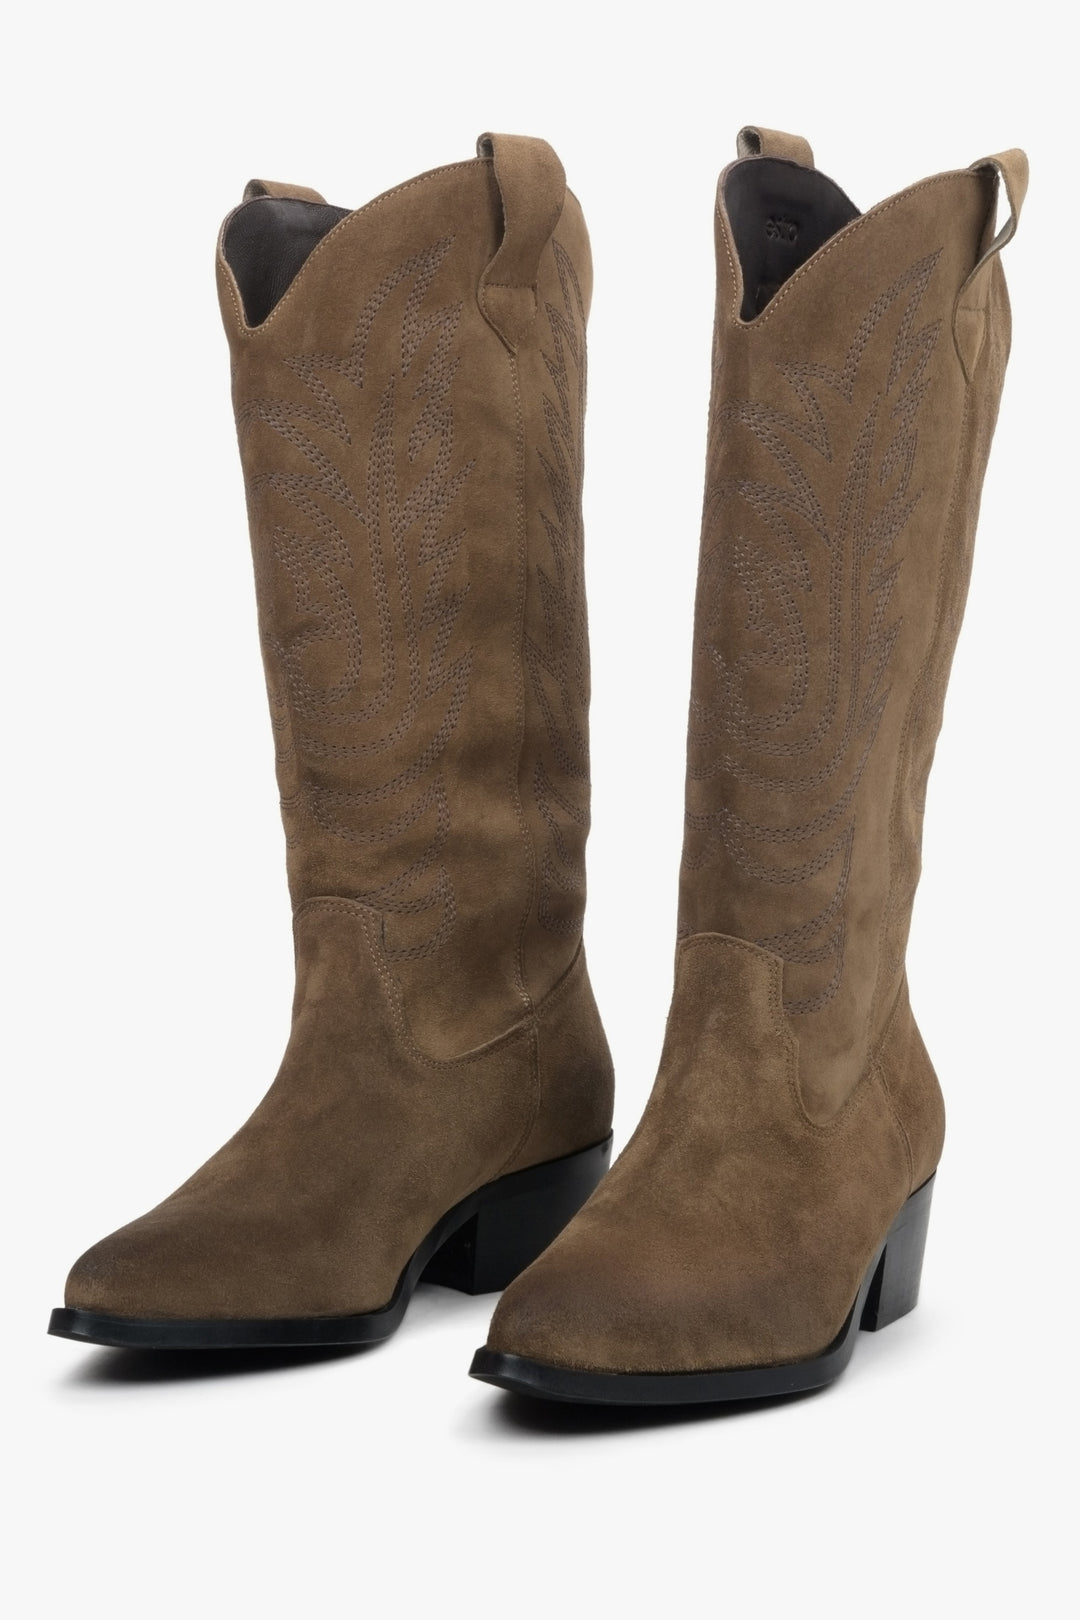 Women's brown suede cowboy boots - frontal presentation of the model.